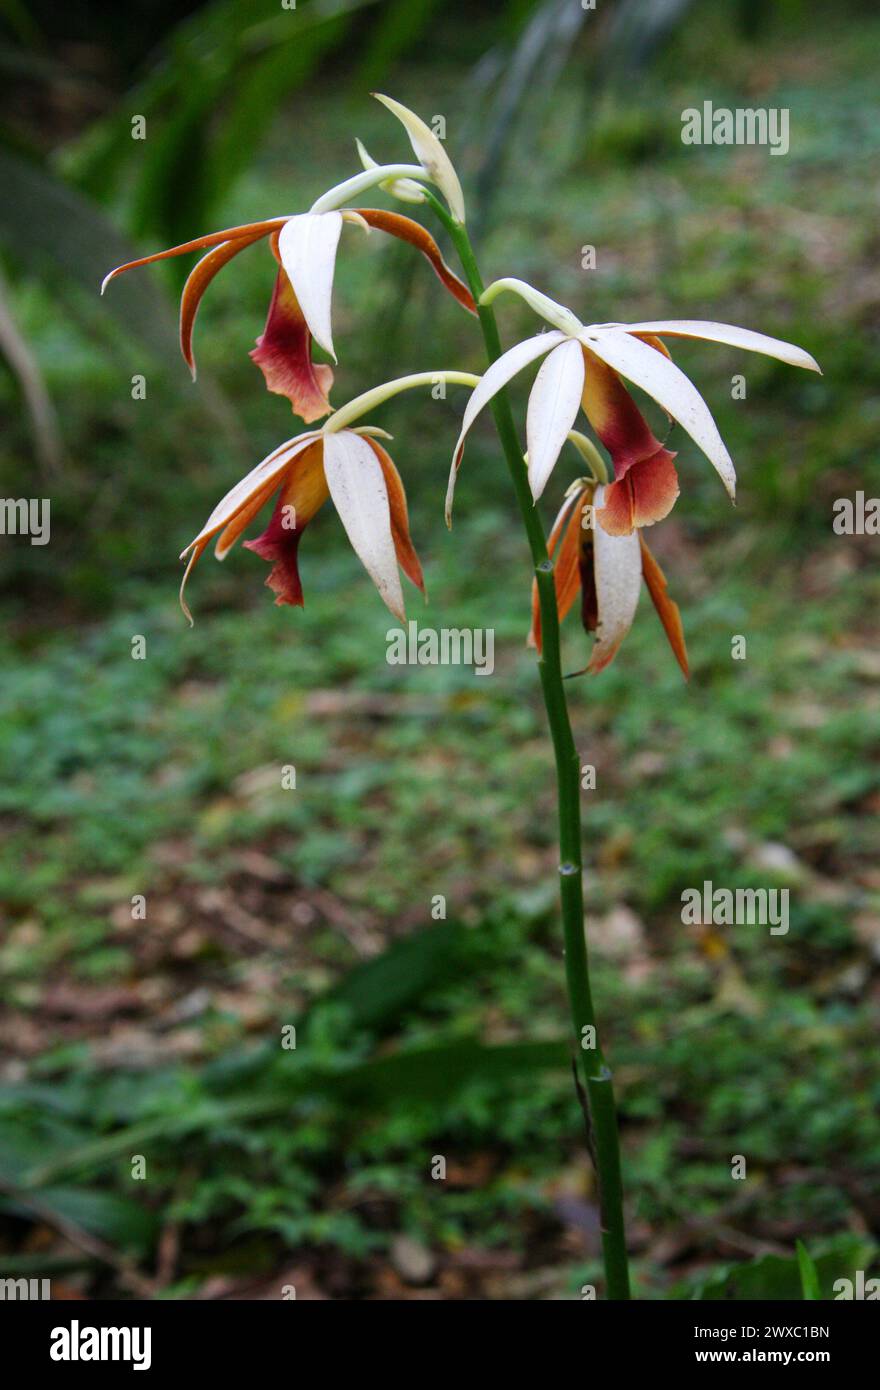 Nun's Orchid, Greater Swamp-orchid, Swamp Lily, Swamp Orchid, Nun's-hood Orchid, Veiled Orchid, Lady Tankerville's Swamp Orchid, Phaius tankervilleae. Stock Photo